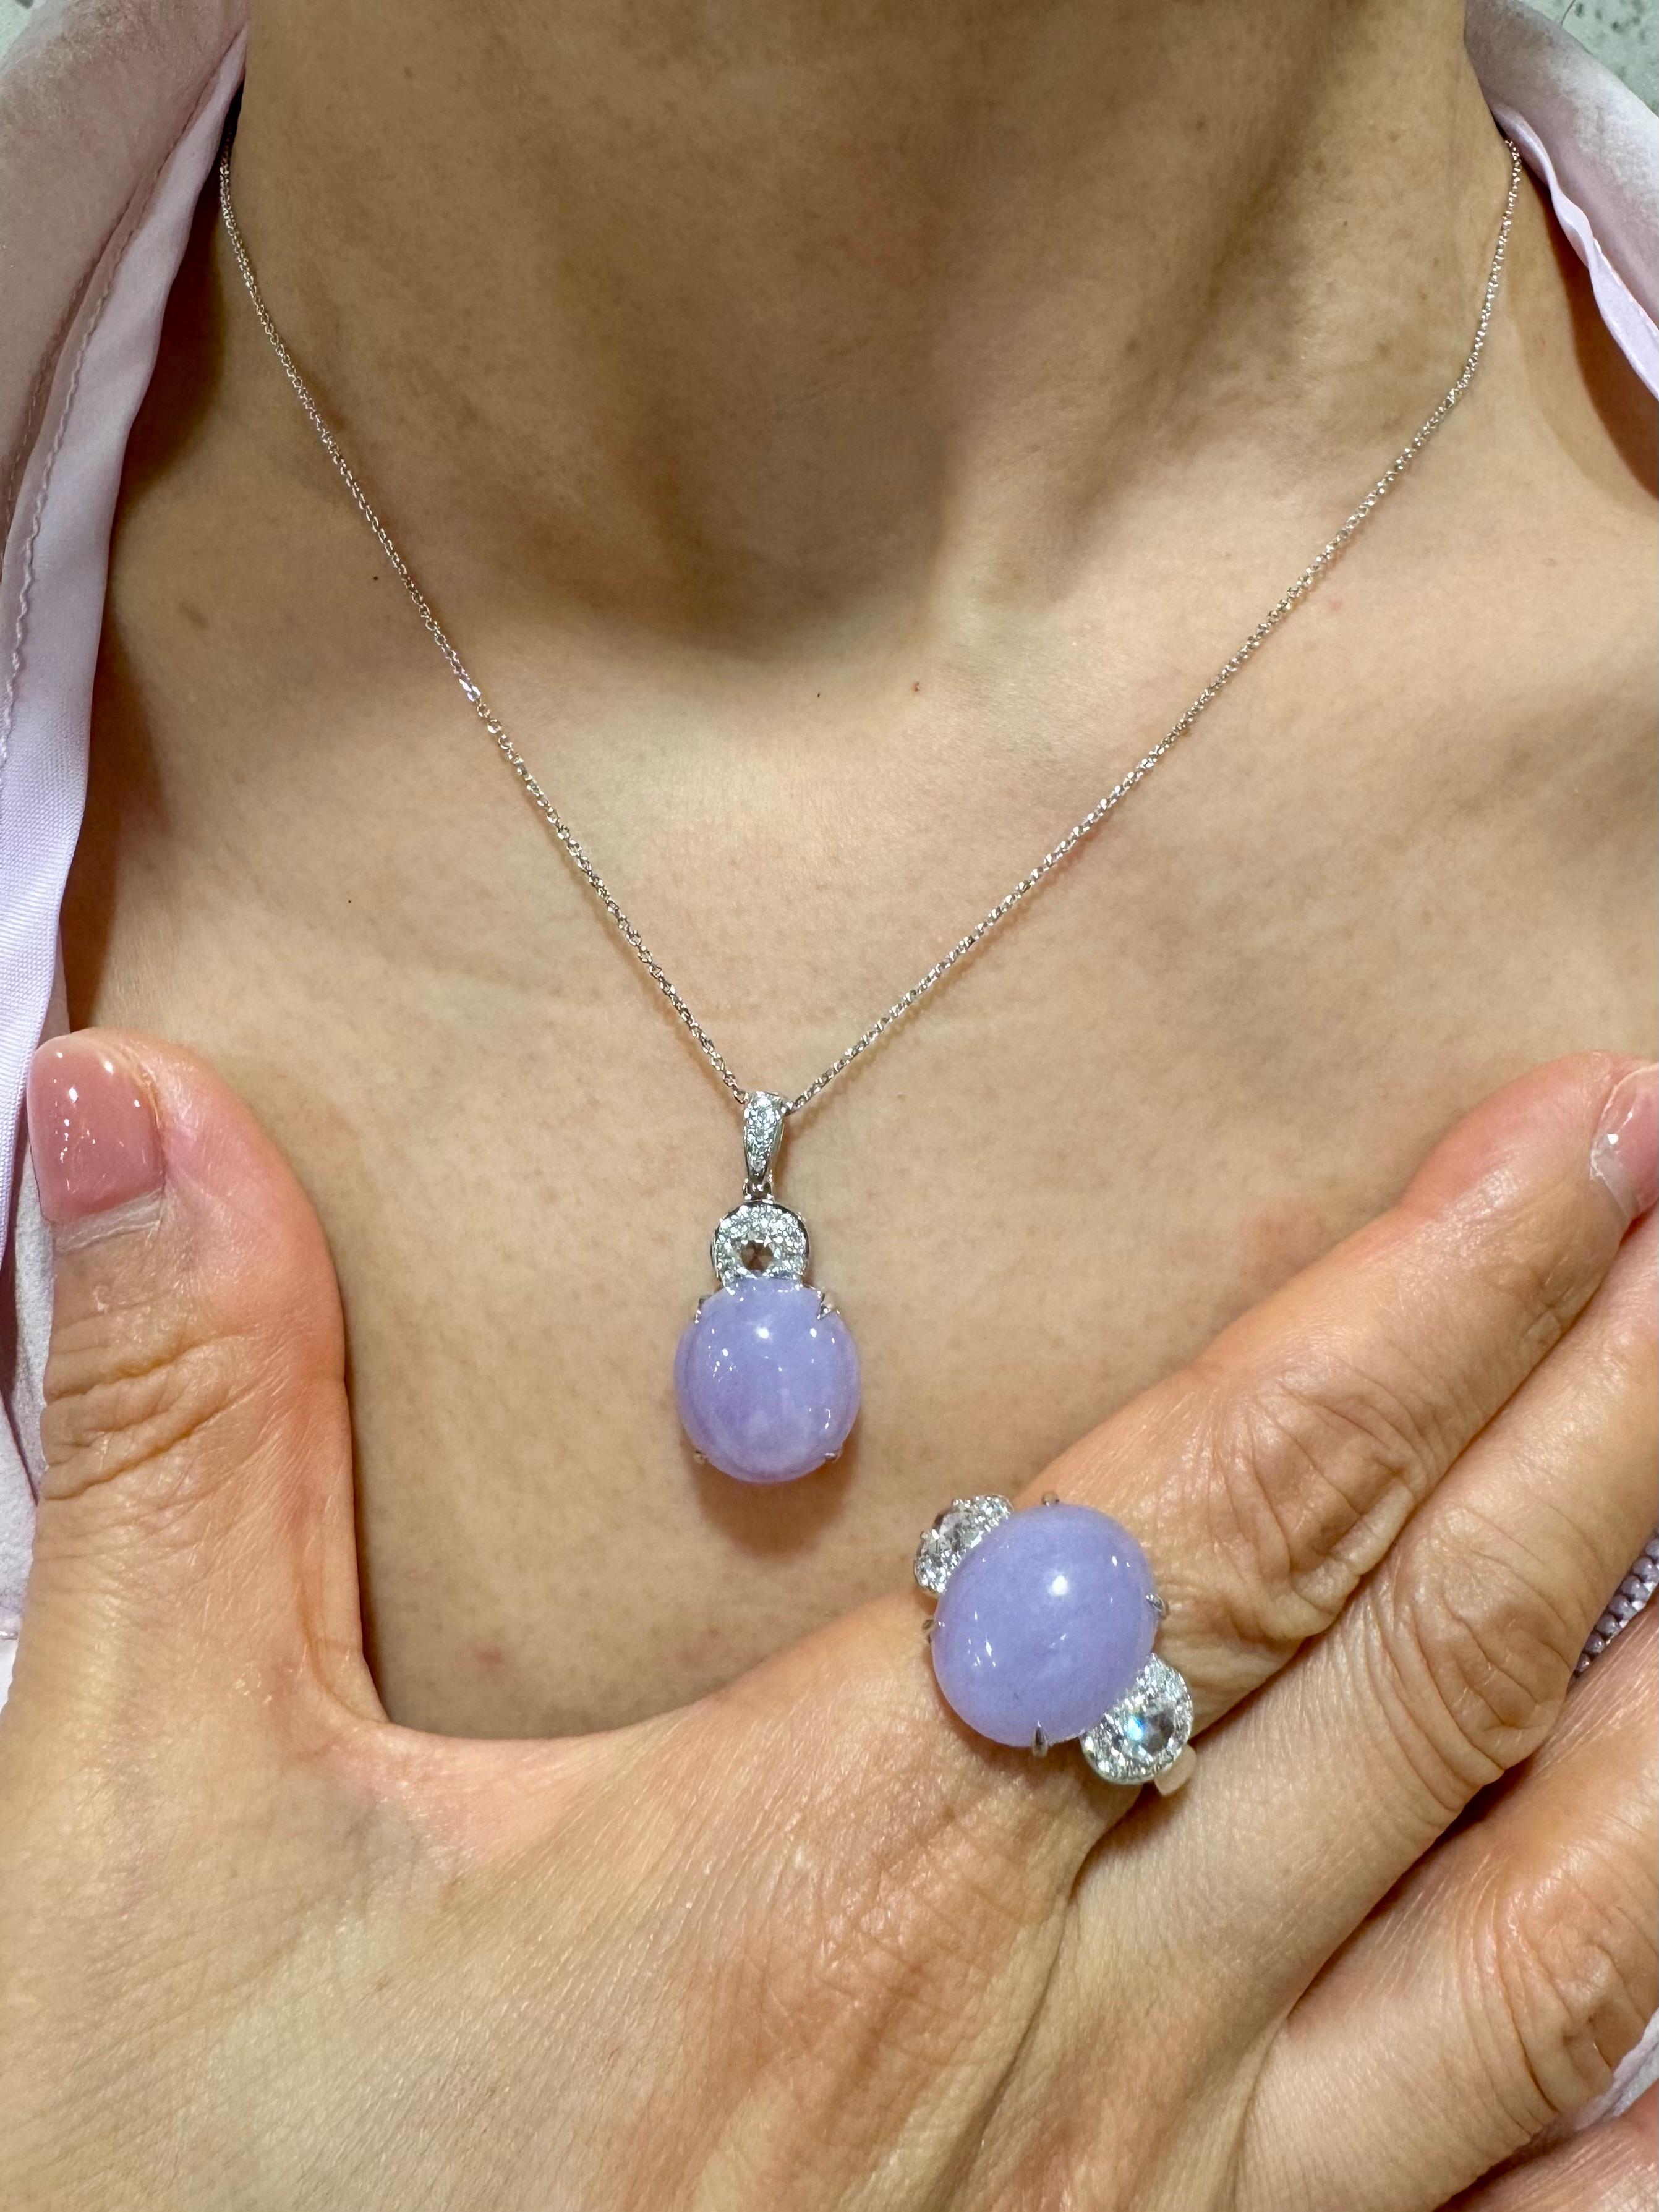 Please check out the HD Video! Here is a very eye pleasing lavender jade-diamond ring and pendant set! Both set with lucky horseshoe motifs.  It is certified natural jadeite jade without any treatment. 
The ring is set in 18k white gold and